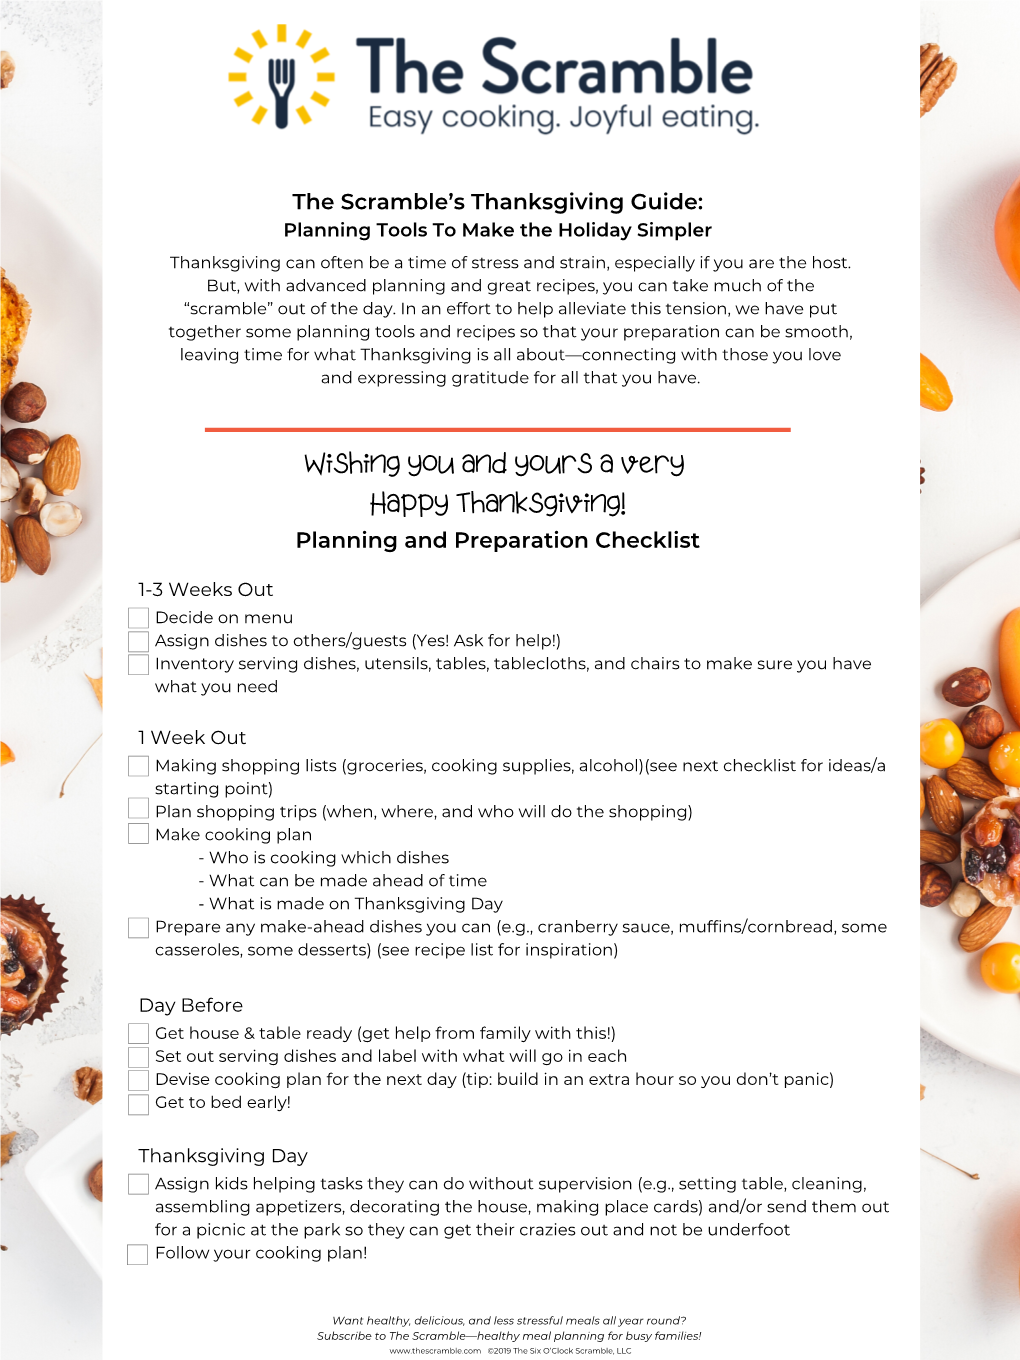 The Scramble's Thanksgiving Checklists Planning Tools So You'll